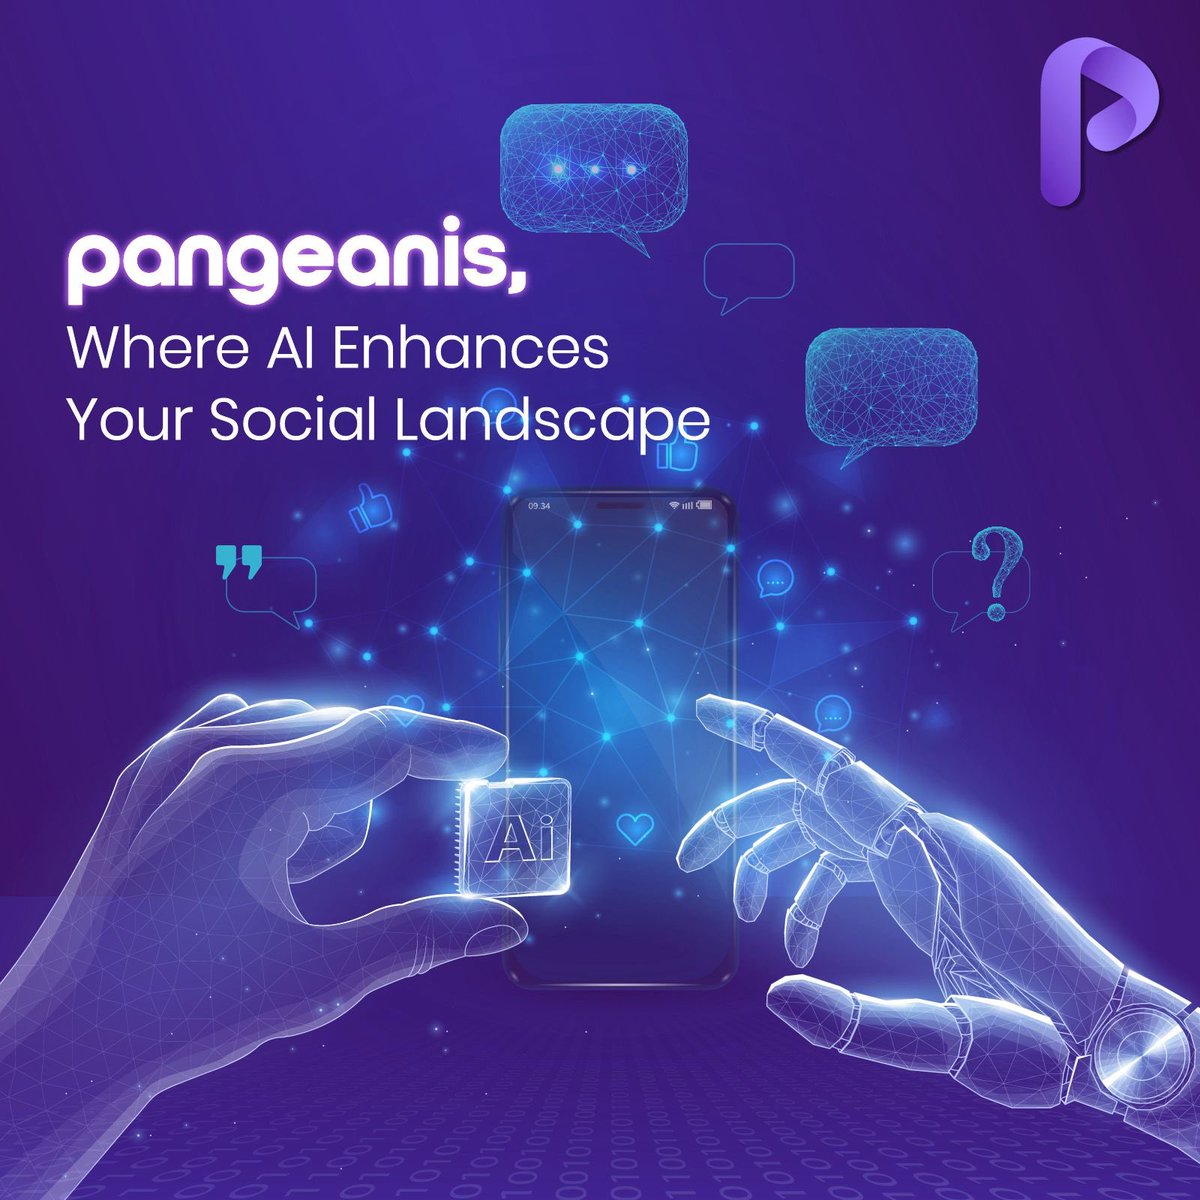 Pangeanis, powered by cutting-edge artificial intelligence, is a digital ecosystem transforming the way we connect, communicate, and create.

Download
#MotherDairyMaaJaisi